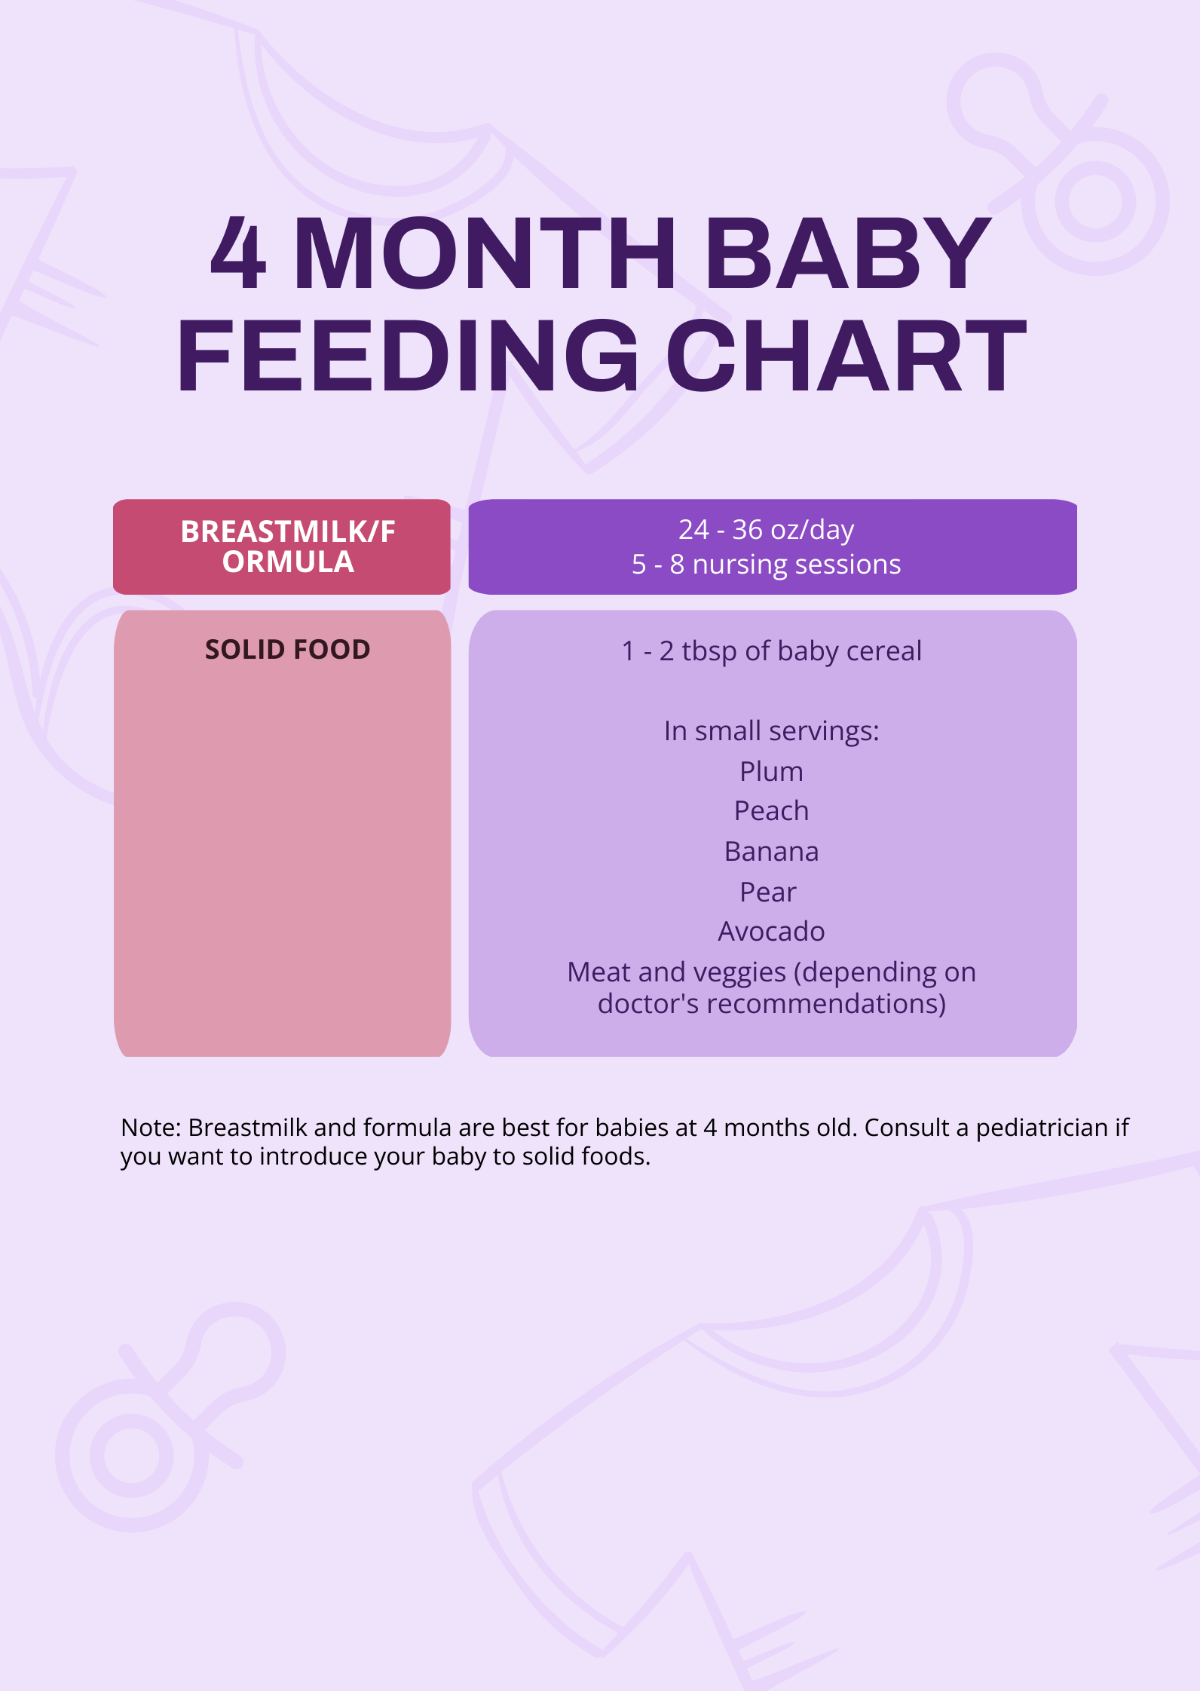 4 Month Baby Feeding Chart Template